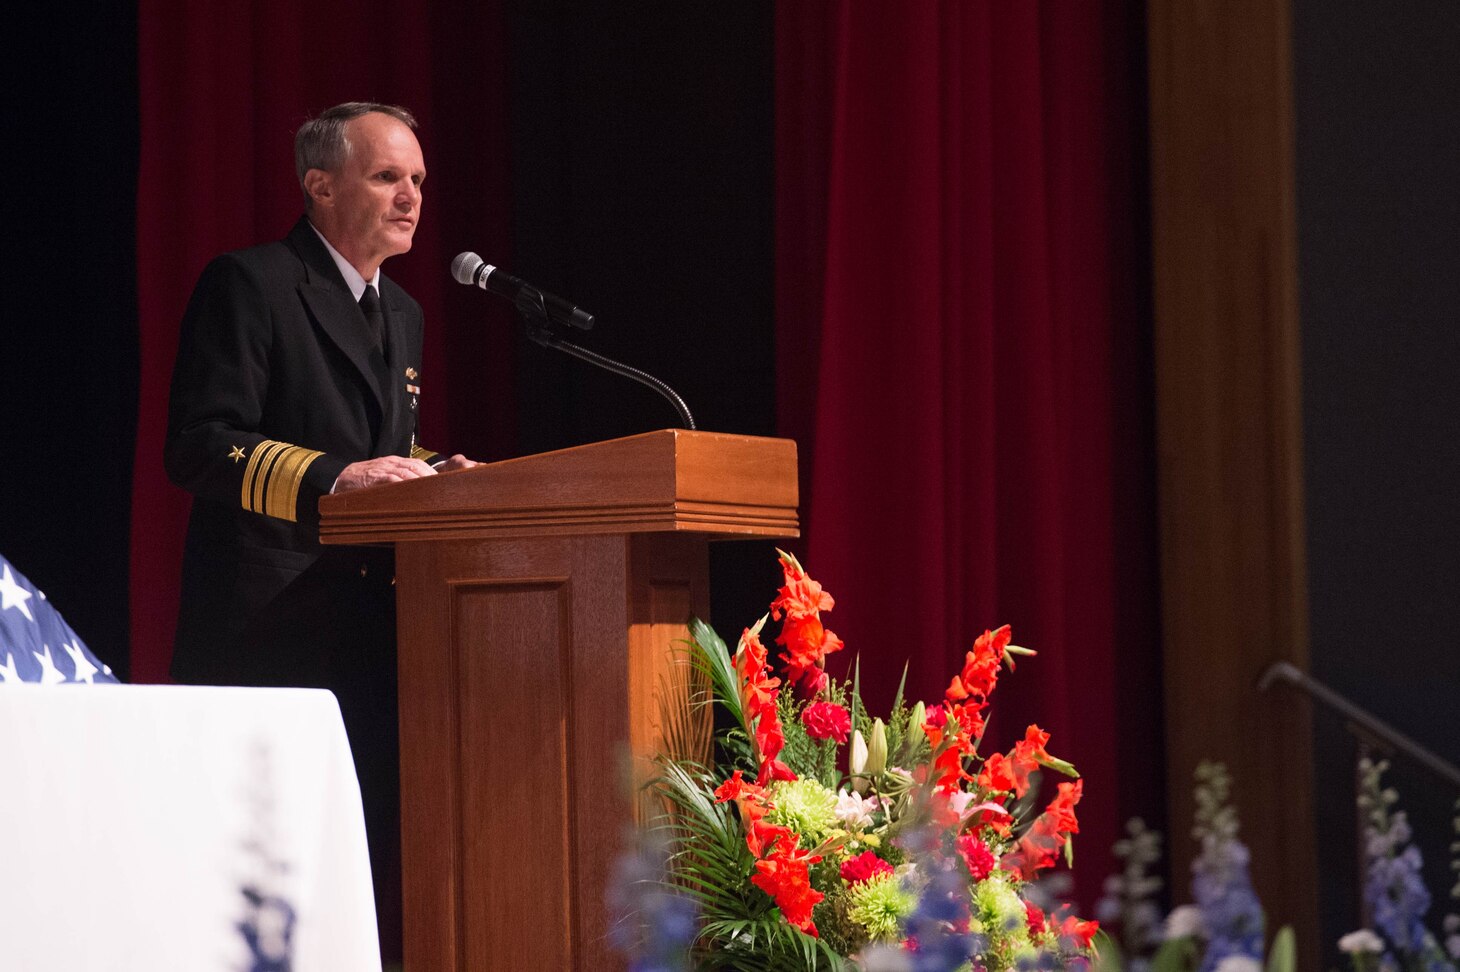 YOKOSUKA, Japan (Oct. 4, 2017) – Vice Adm. Phillip G. Sawyer addresses attendees of the USS John S. McCain Memorial Service at Fleet Activities Yokosuka Fleet Theater, Oct. 4. Family, shipmates, and other Yokosuka community members attended the memorial to honor the 10 McCain Sailors who perished following the destroyer’s Aug. 21 collision at sea.